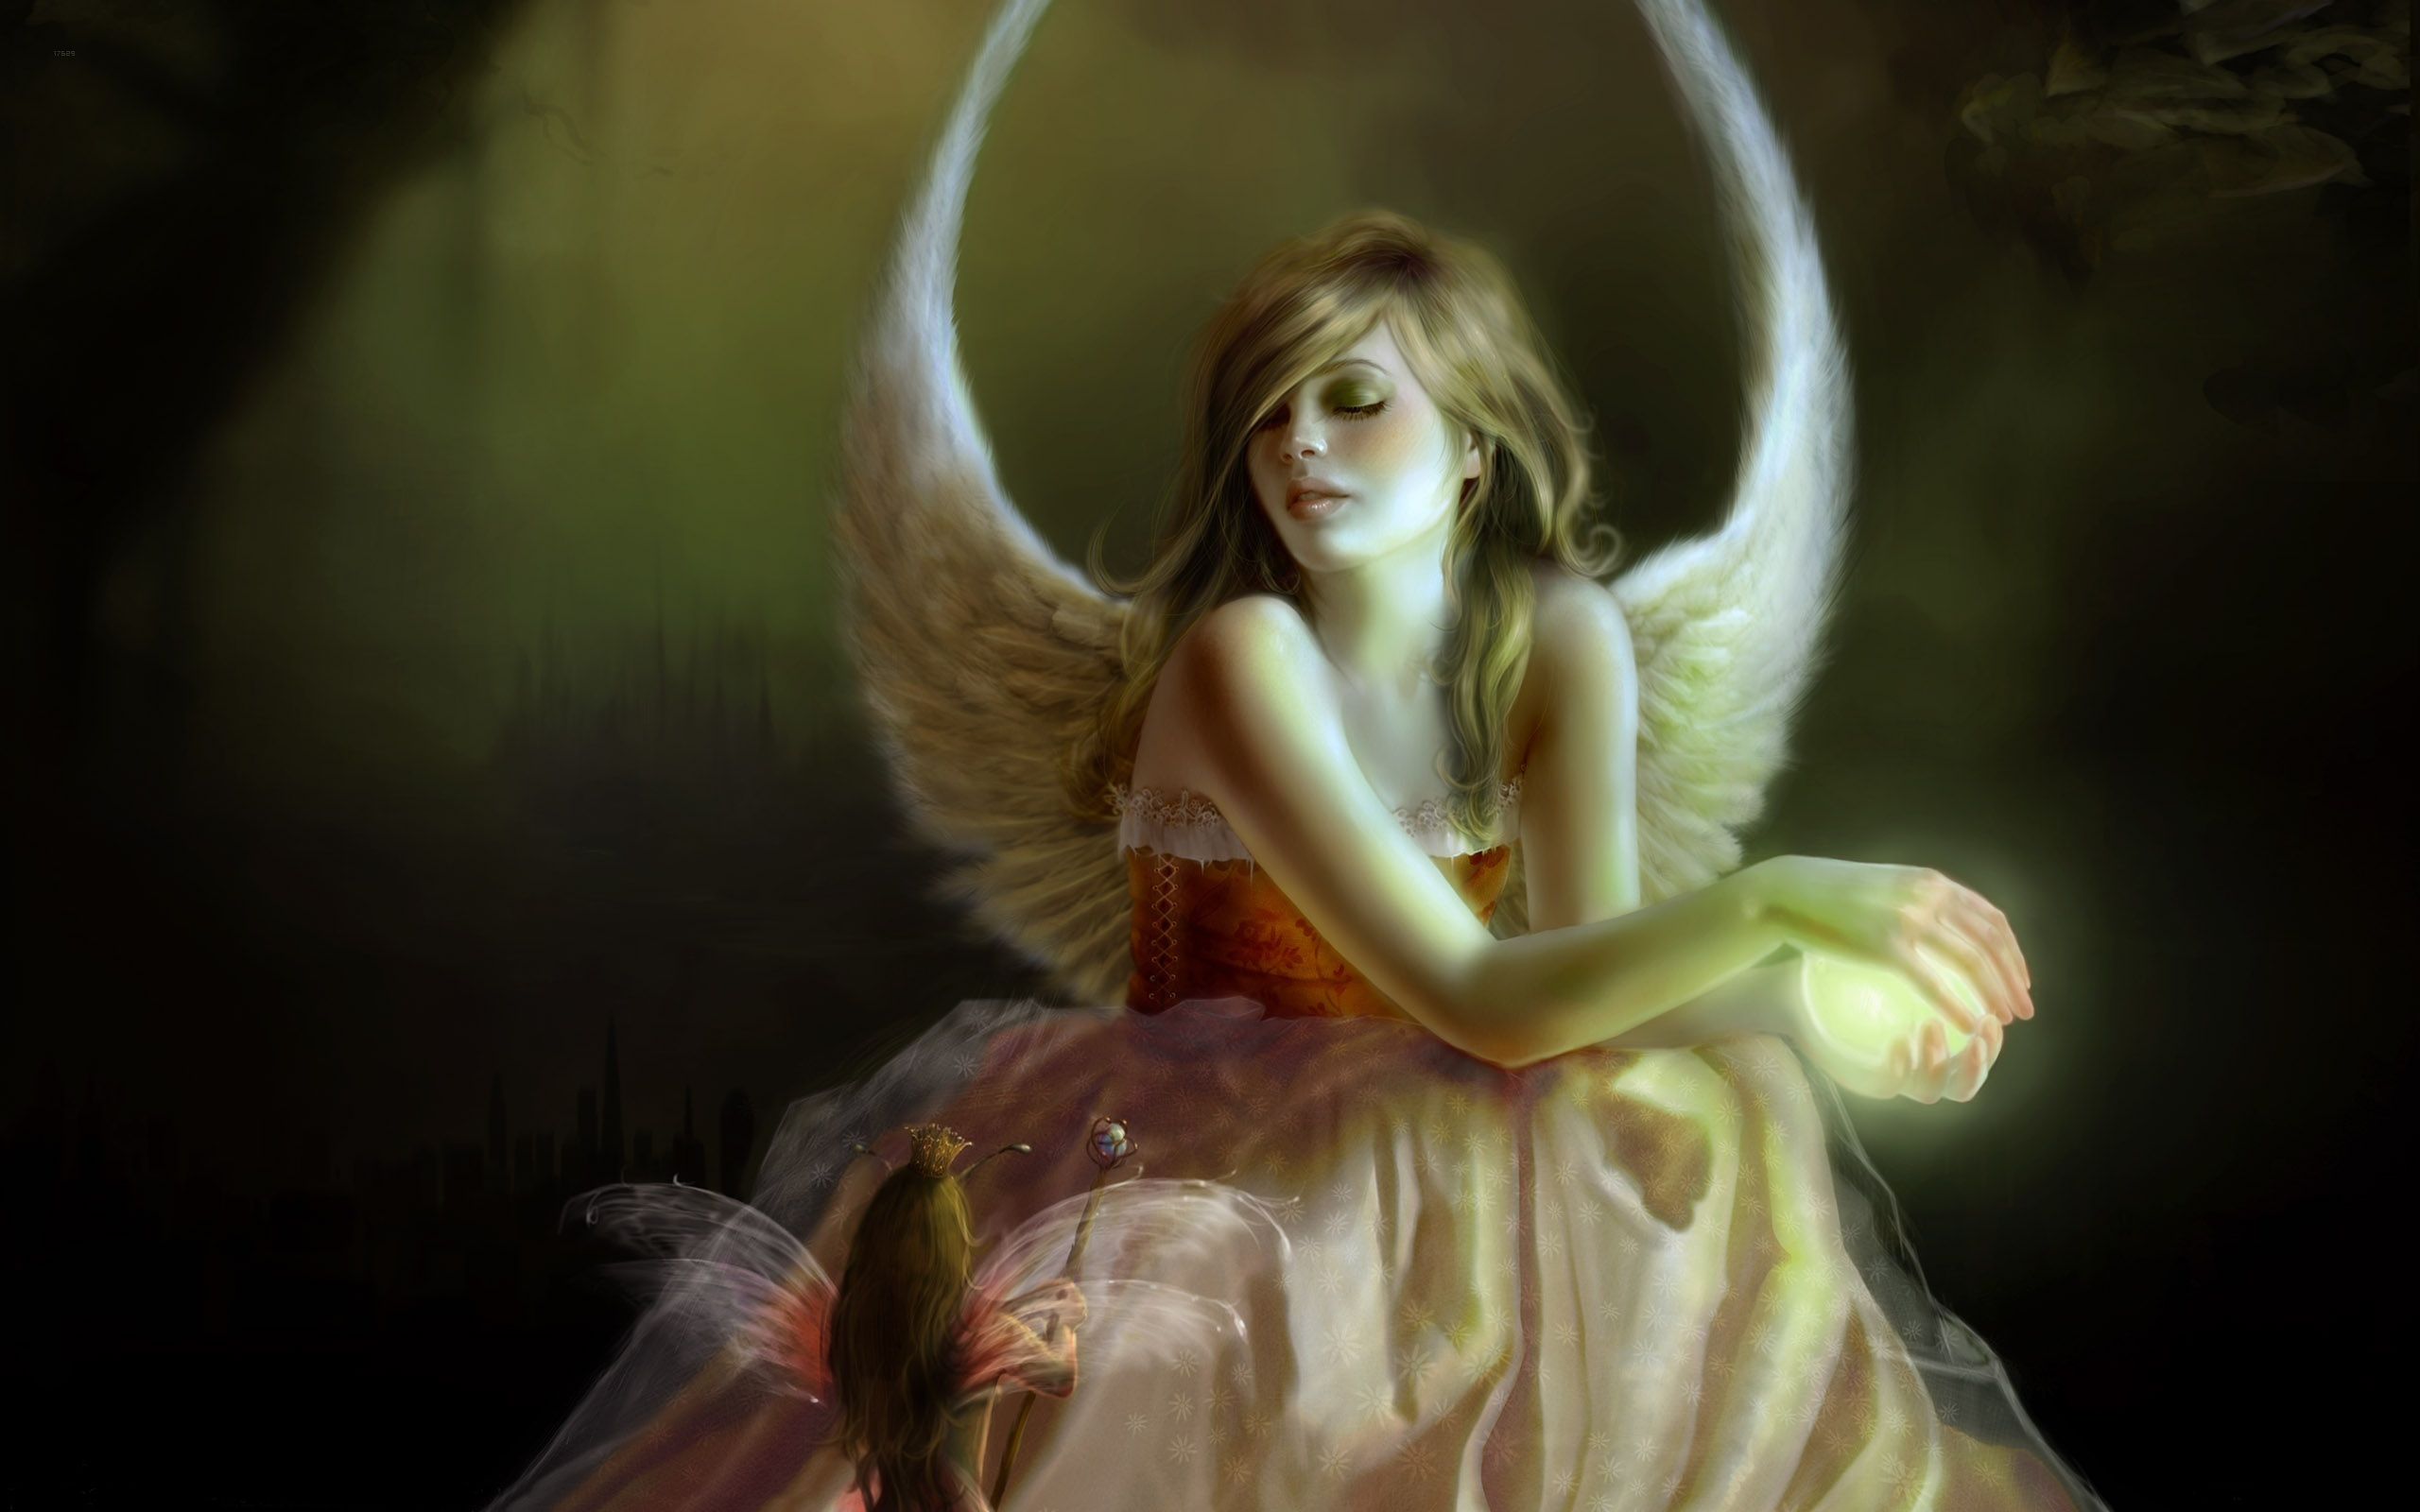 angels and fairies Wallpaper Background 28071 2560x1600